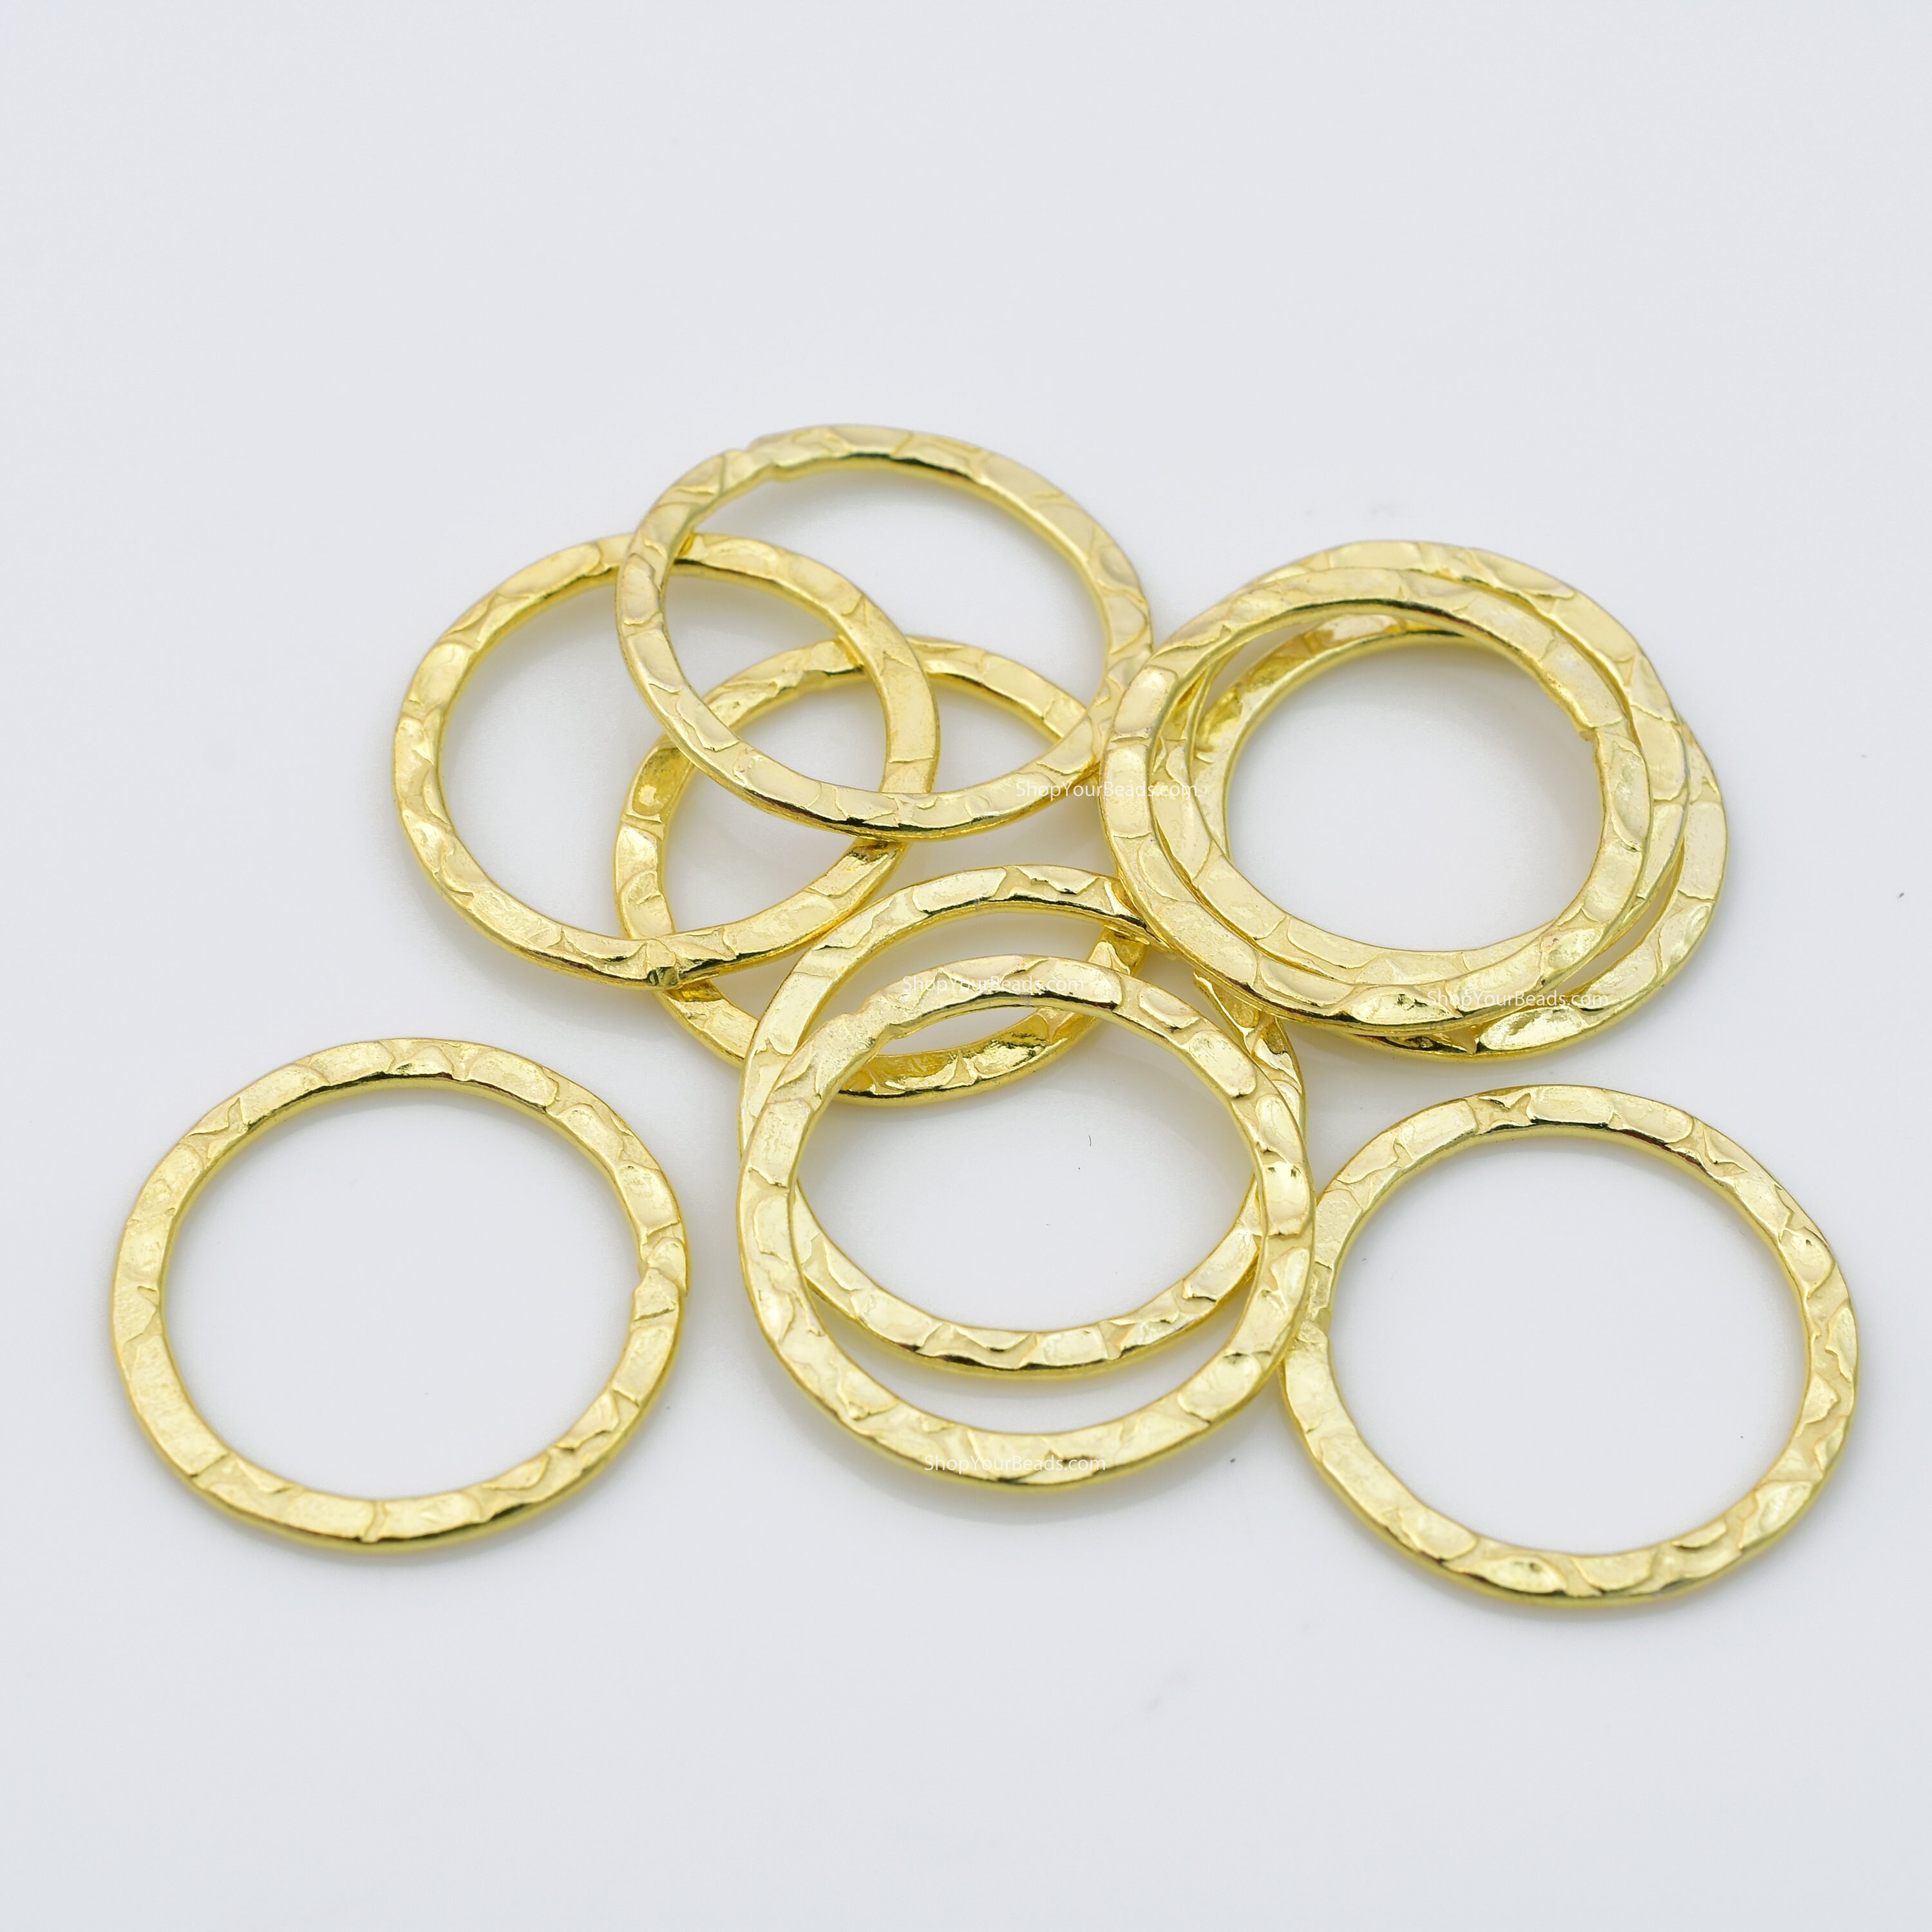 Gold Saucer Beads 8mm-20pcs, Gold Plated Brushed Spacer Beads, Metal Beads  for Jewelry Making 